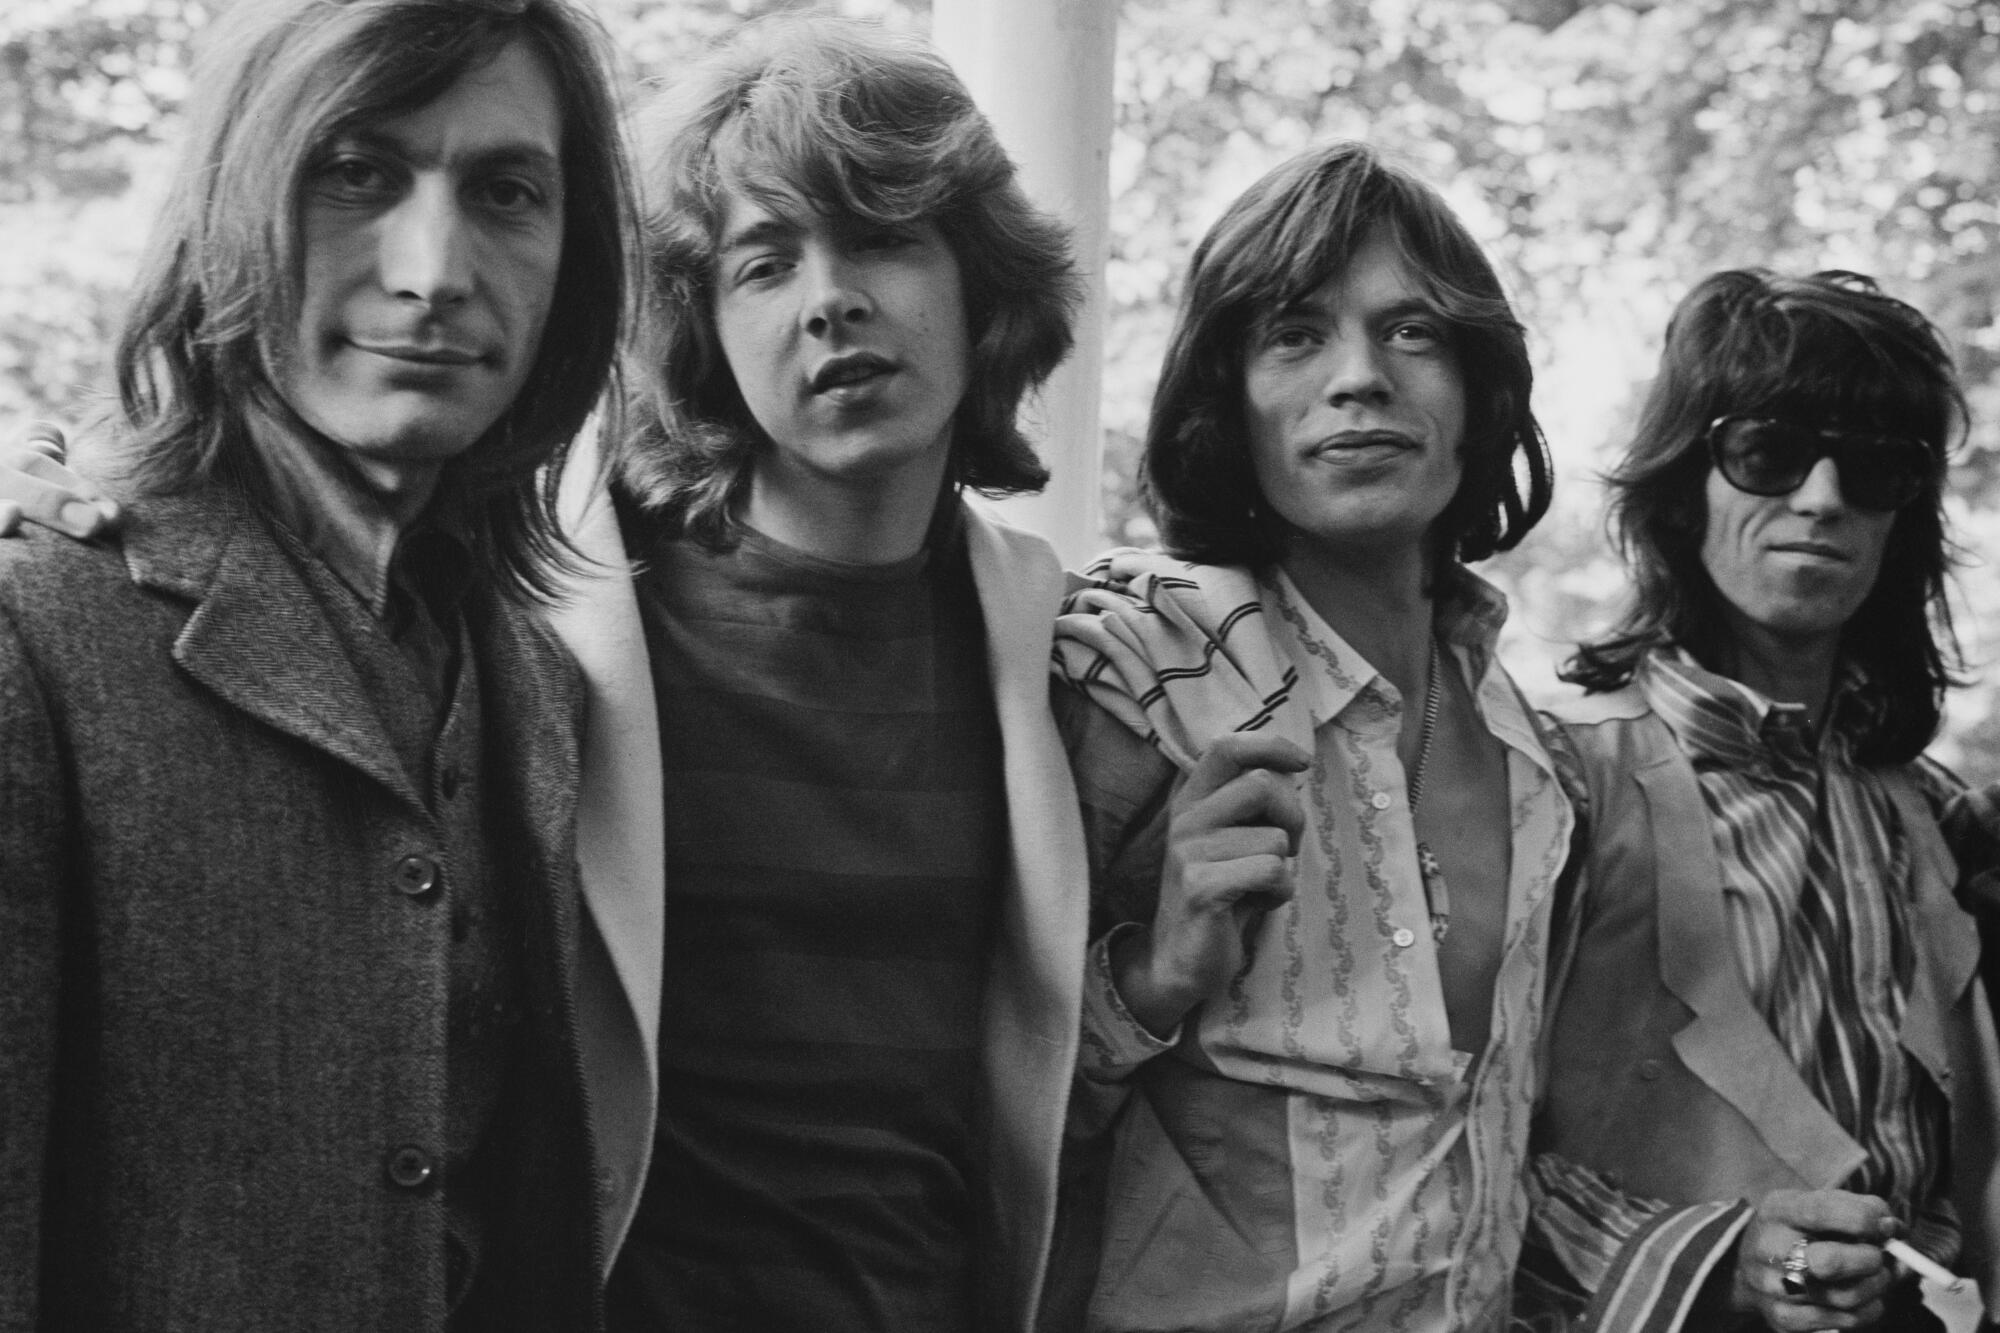 The Rolling Stones in Hyde Park, London, in 1969: Charlie Watts, Mick Taylor, Mick Jagger, Keith Richards.